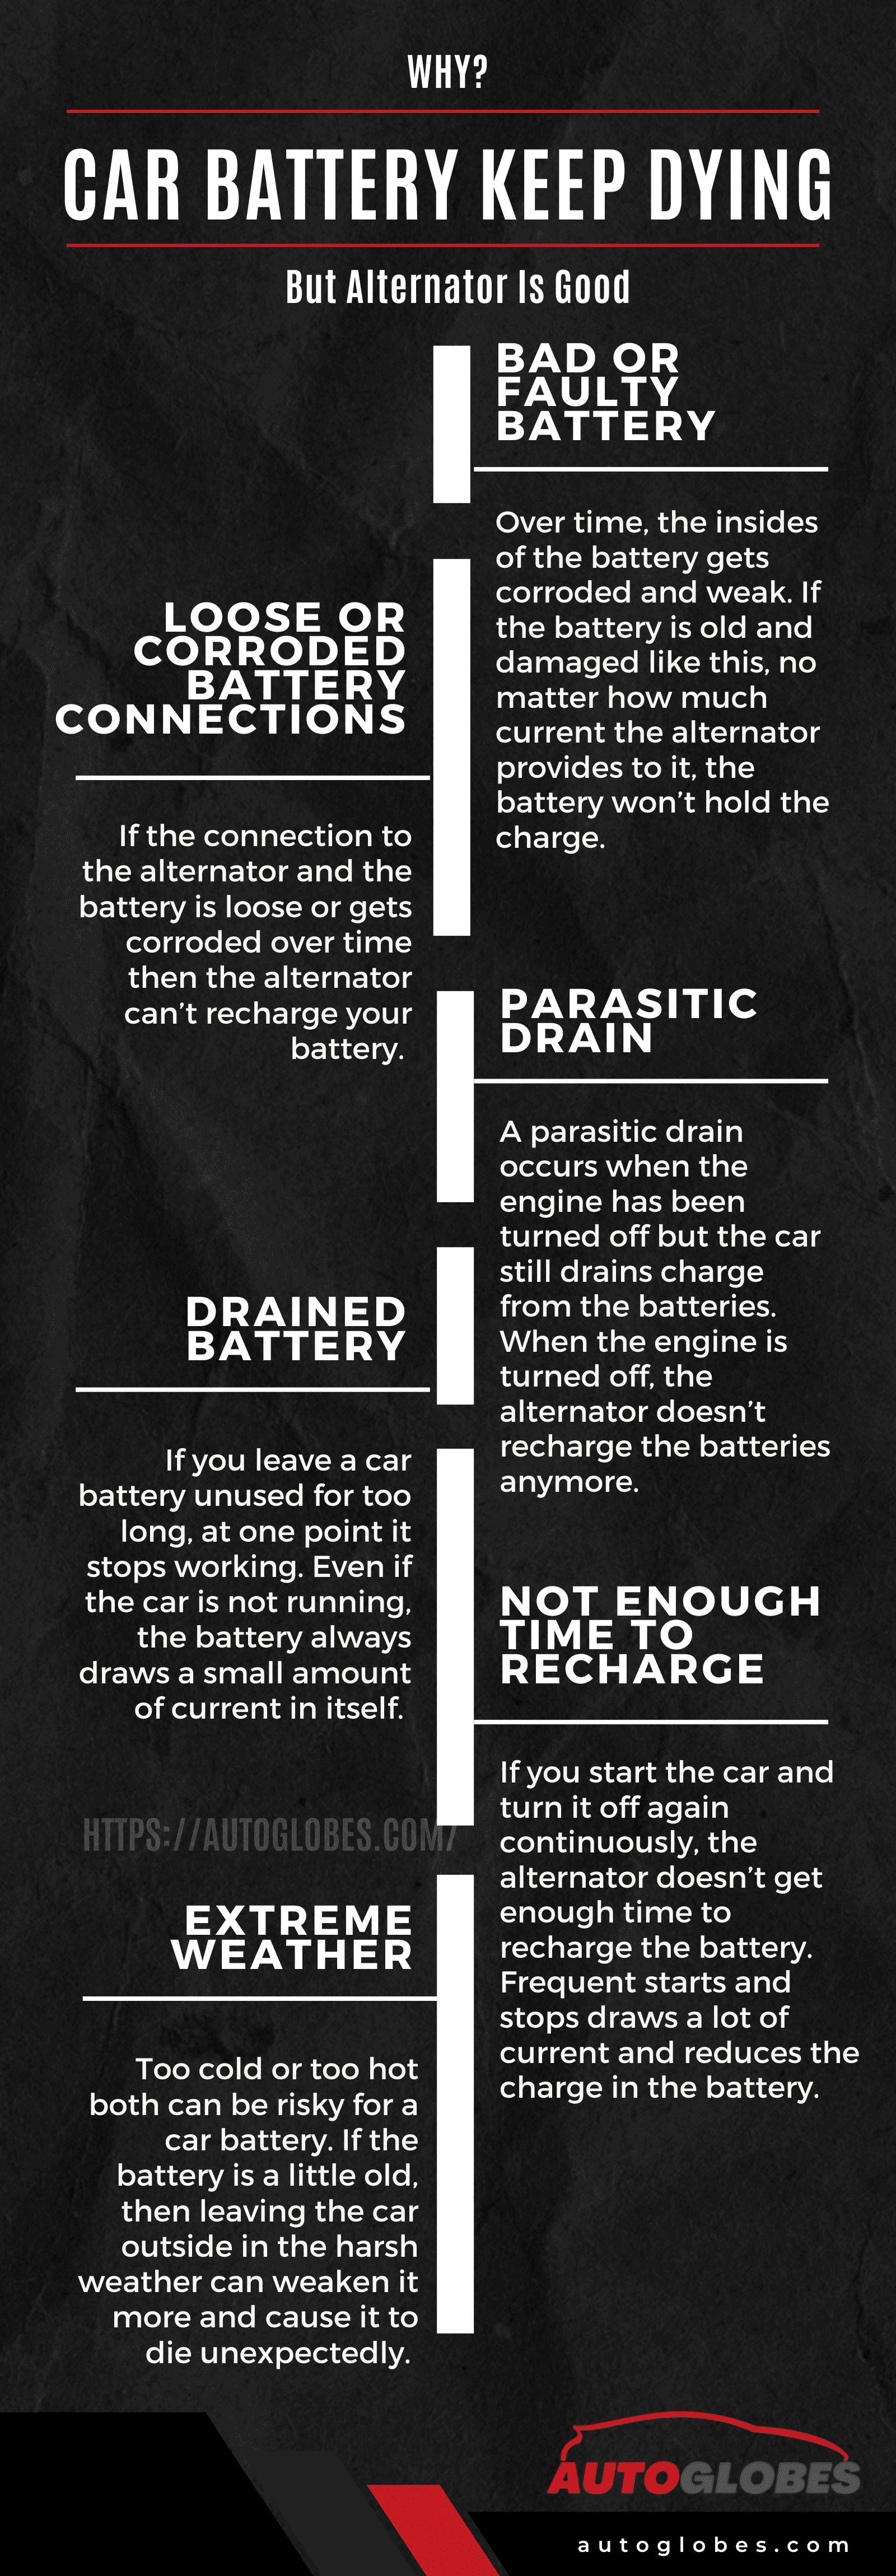 Why Does Car Battery Keep Dying But Alternator Is Good infographic